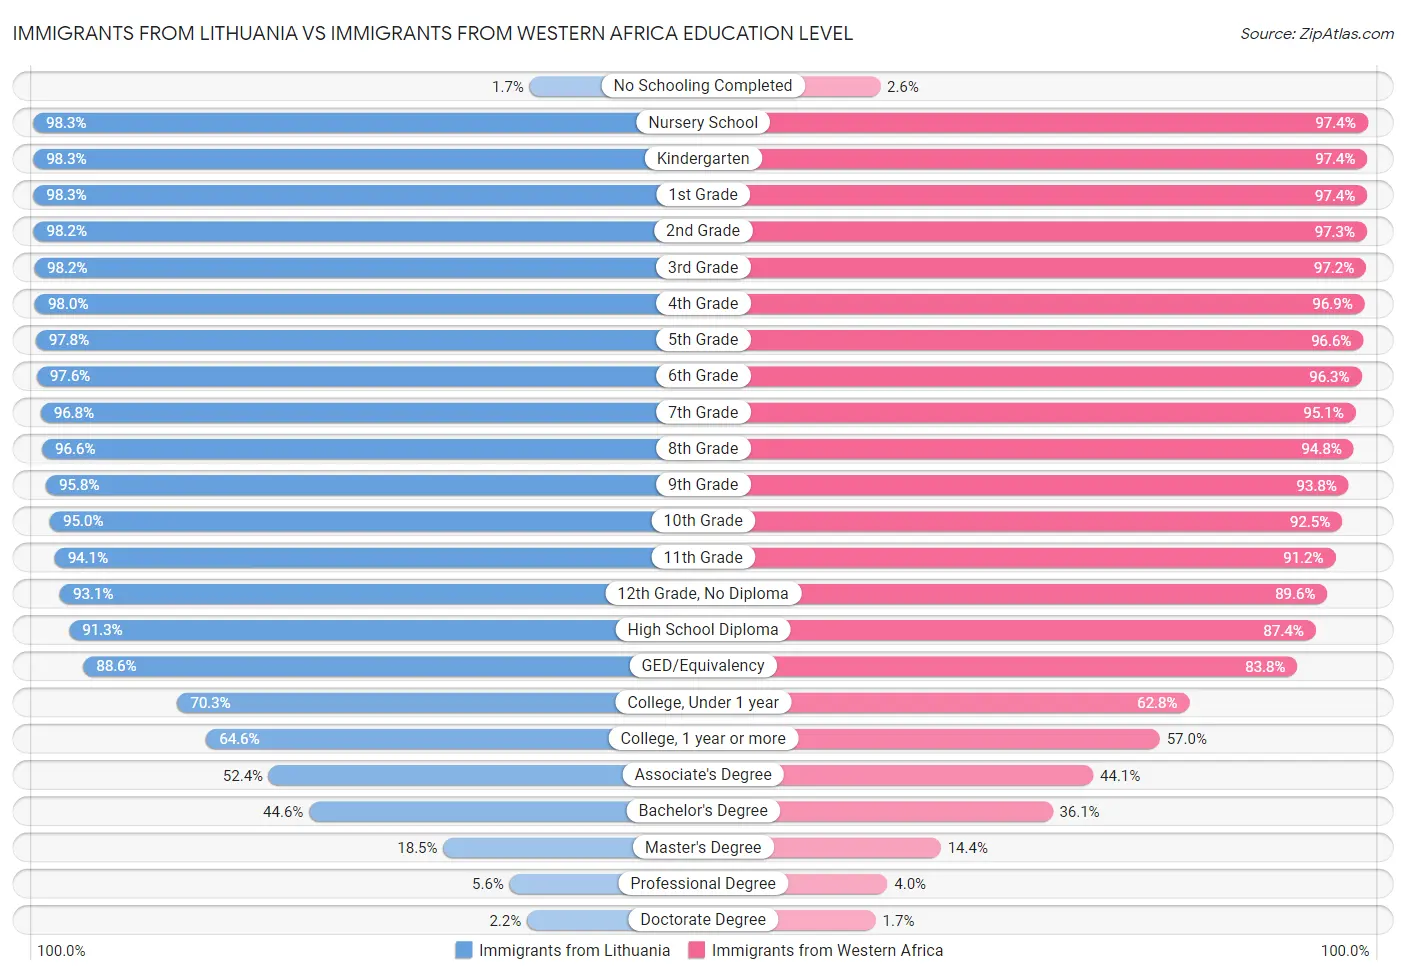 Immigrants from Lithuania vs Immigrants from Western Africa Education Level